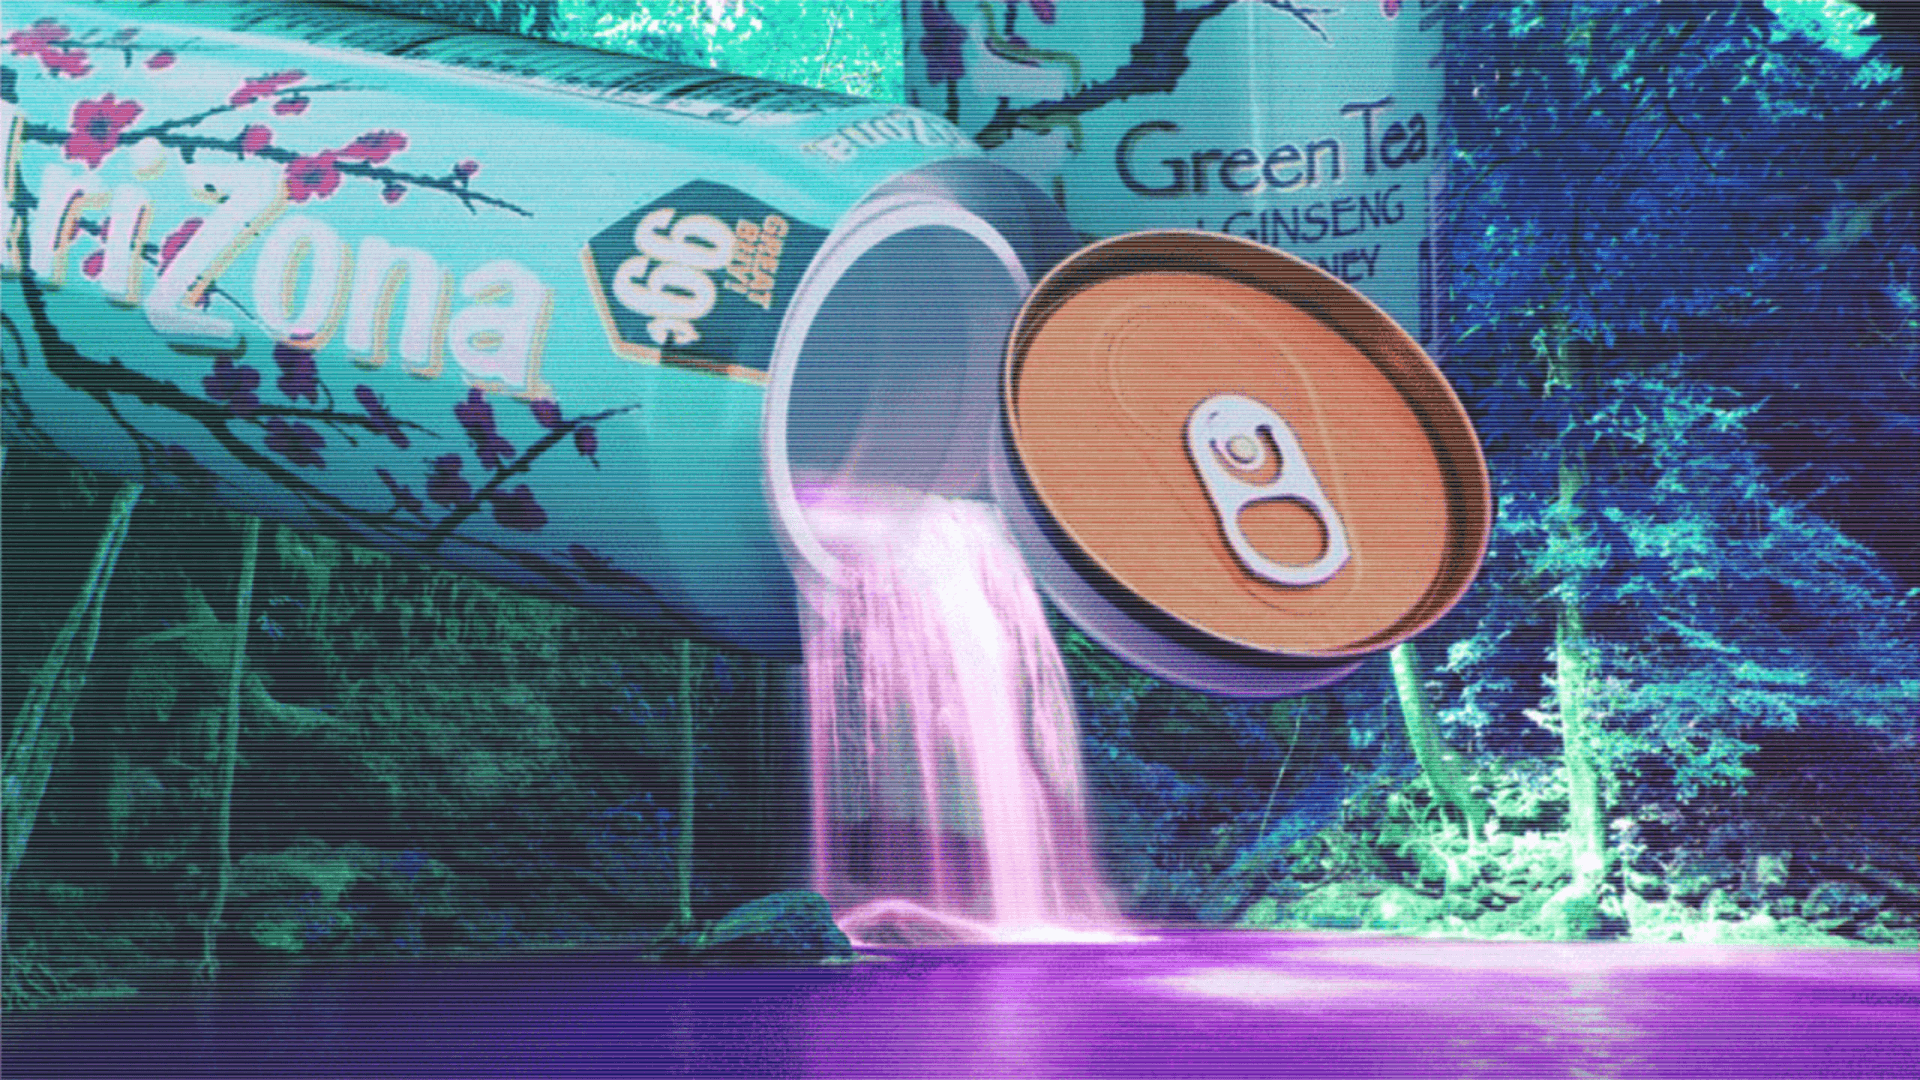 Vaporwave Wallpapers Mobile : 3D Object & CG Wallpapers